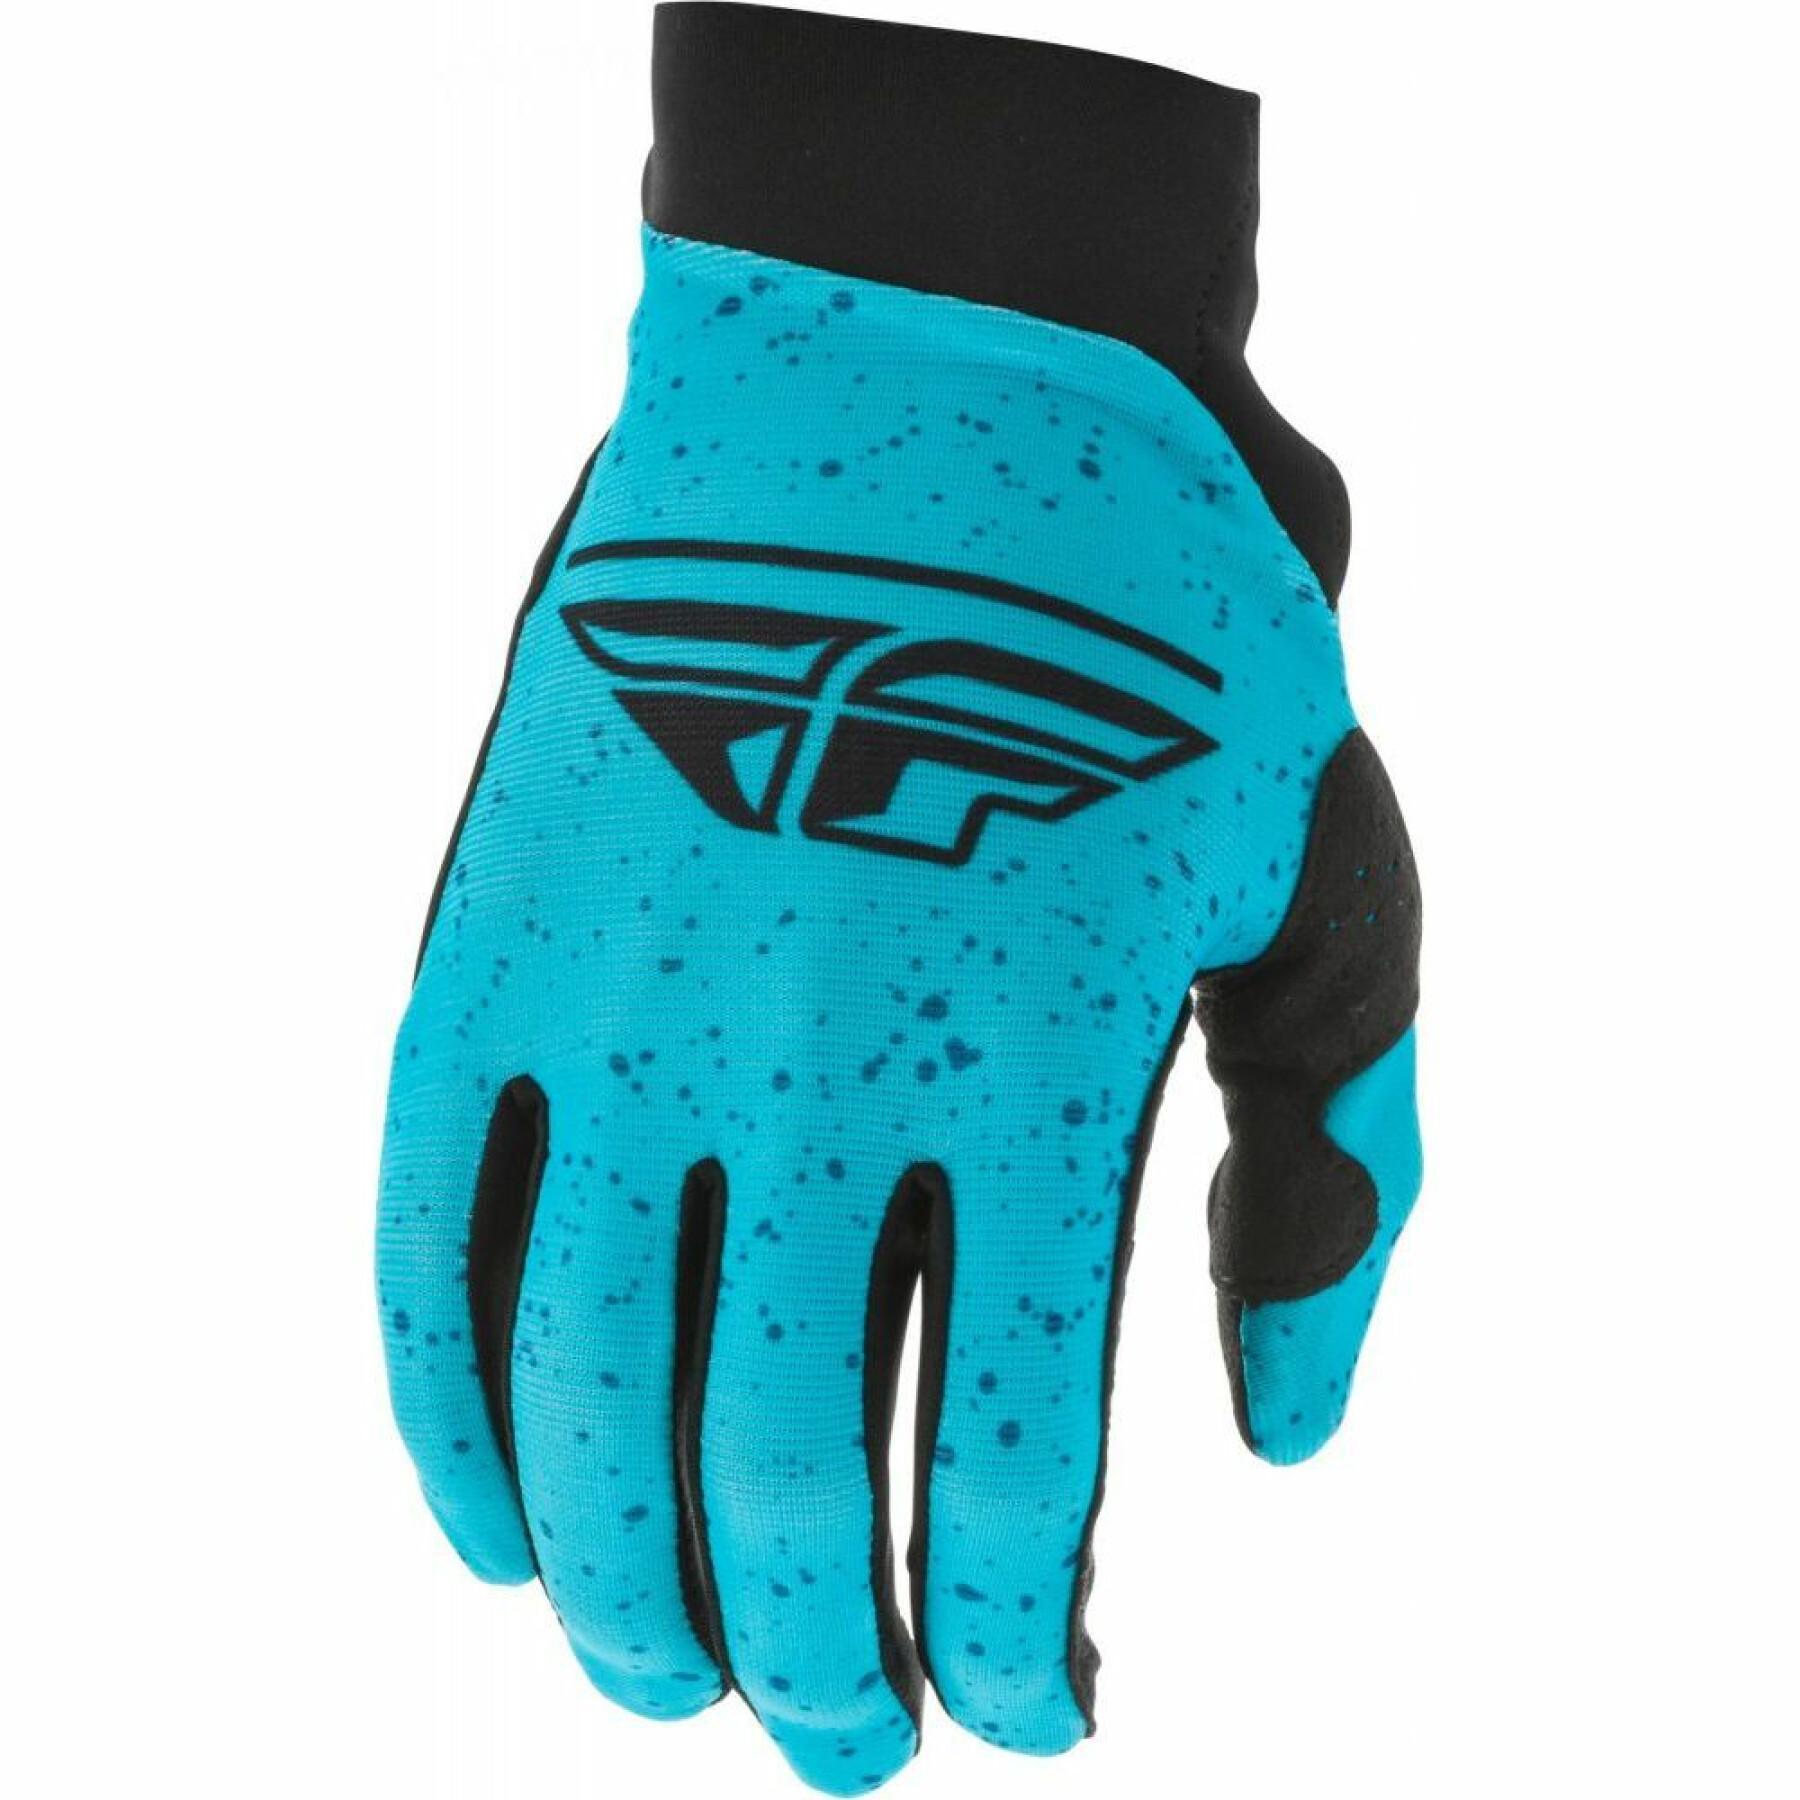 Long gloves woman Fly Racing Pro Lite 2020